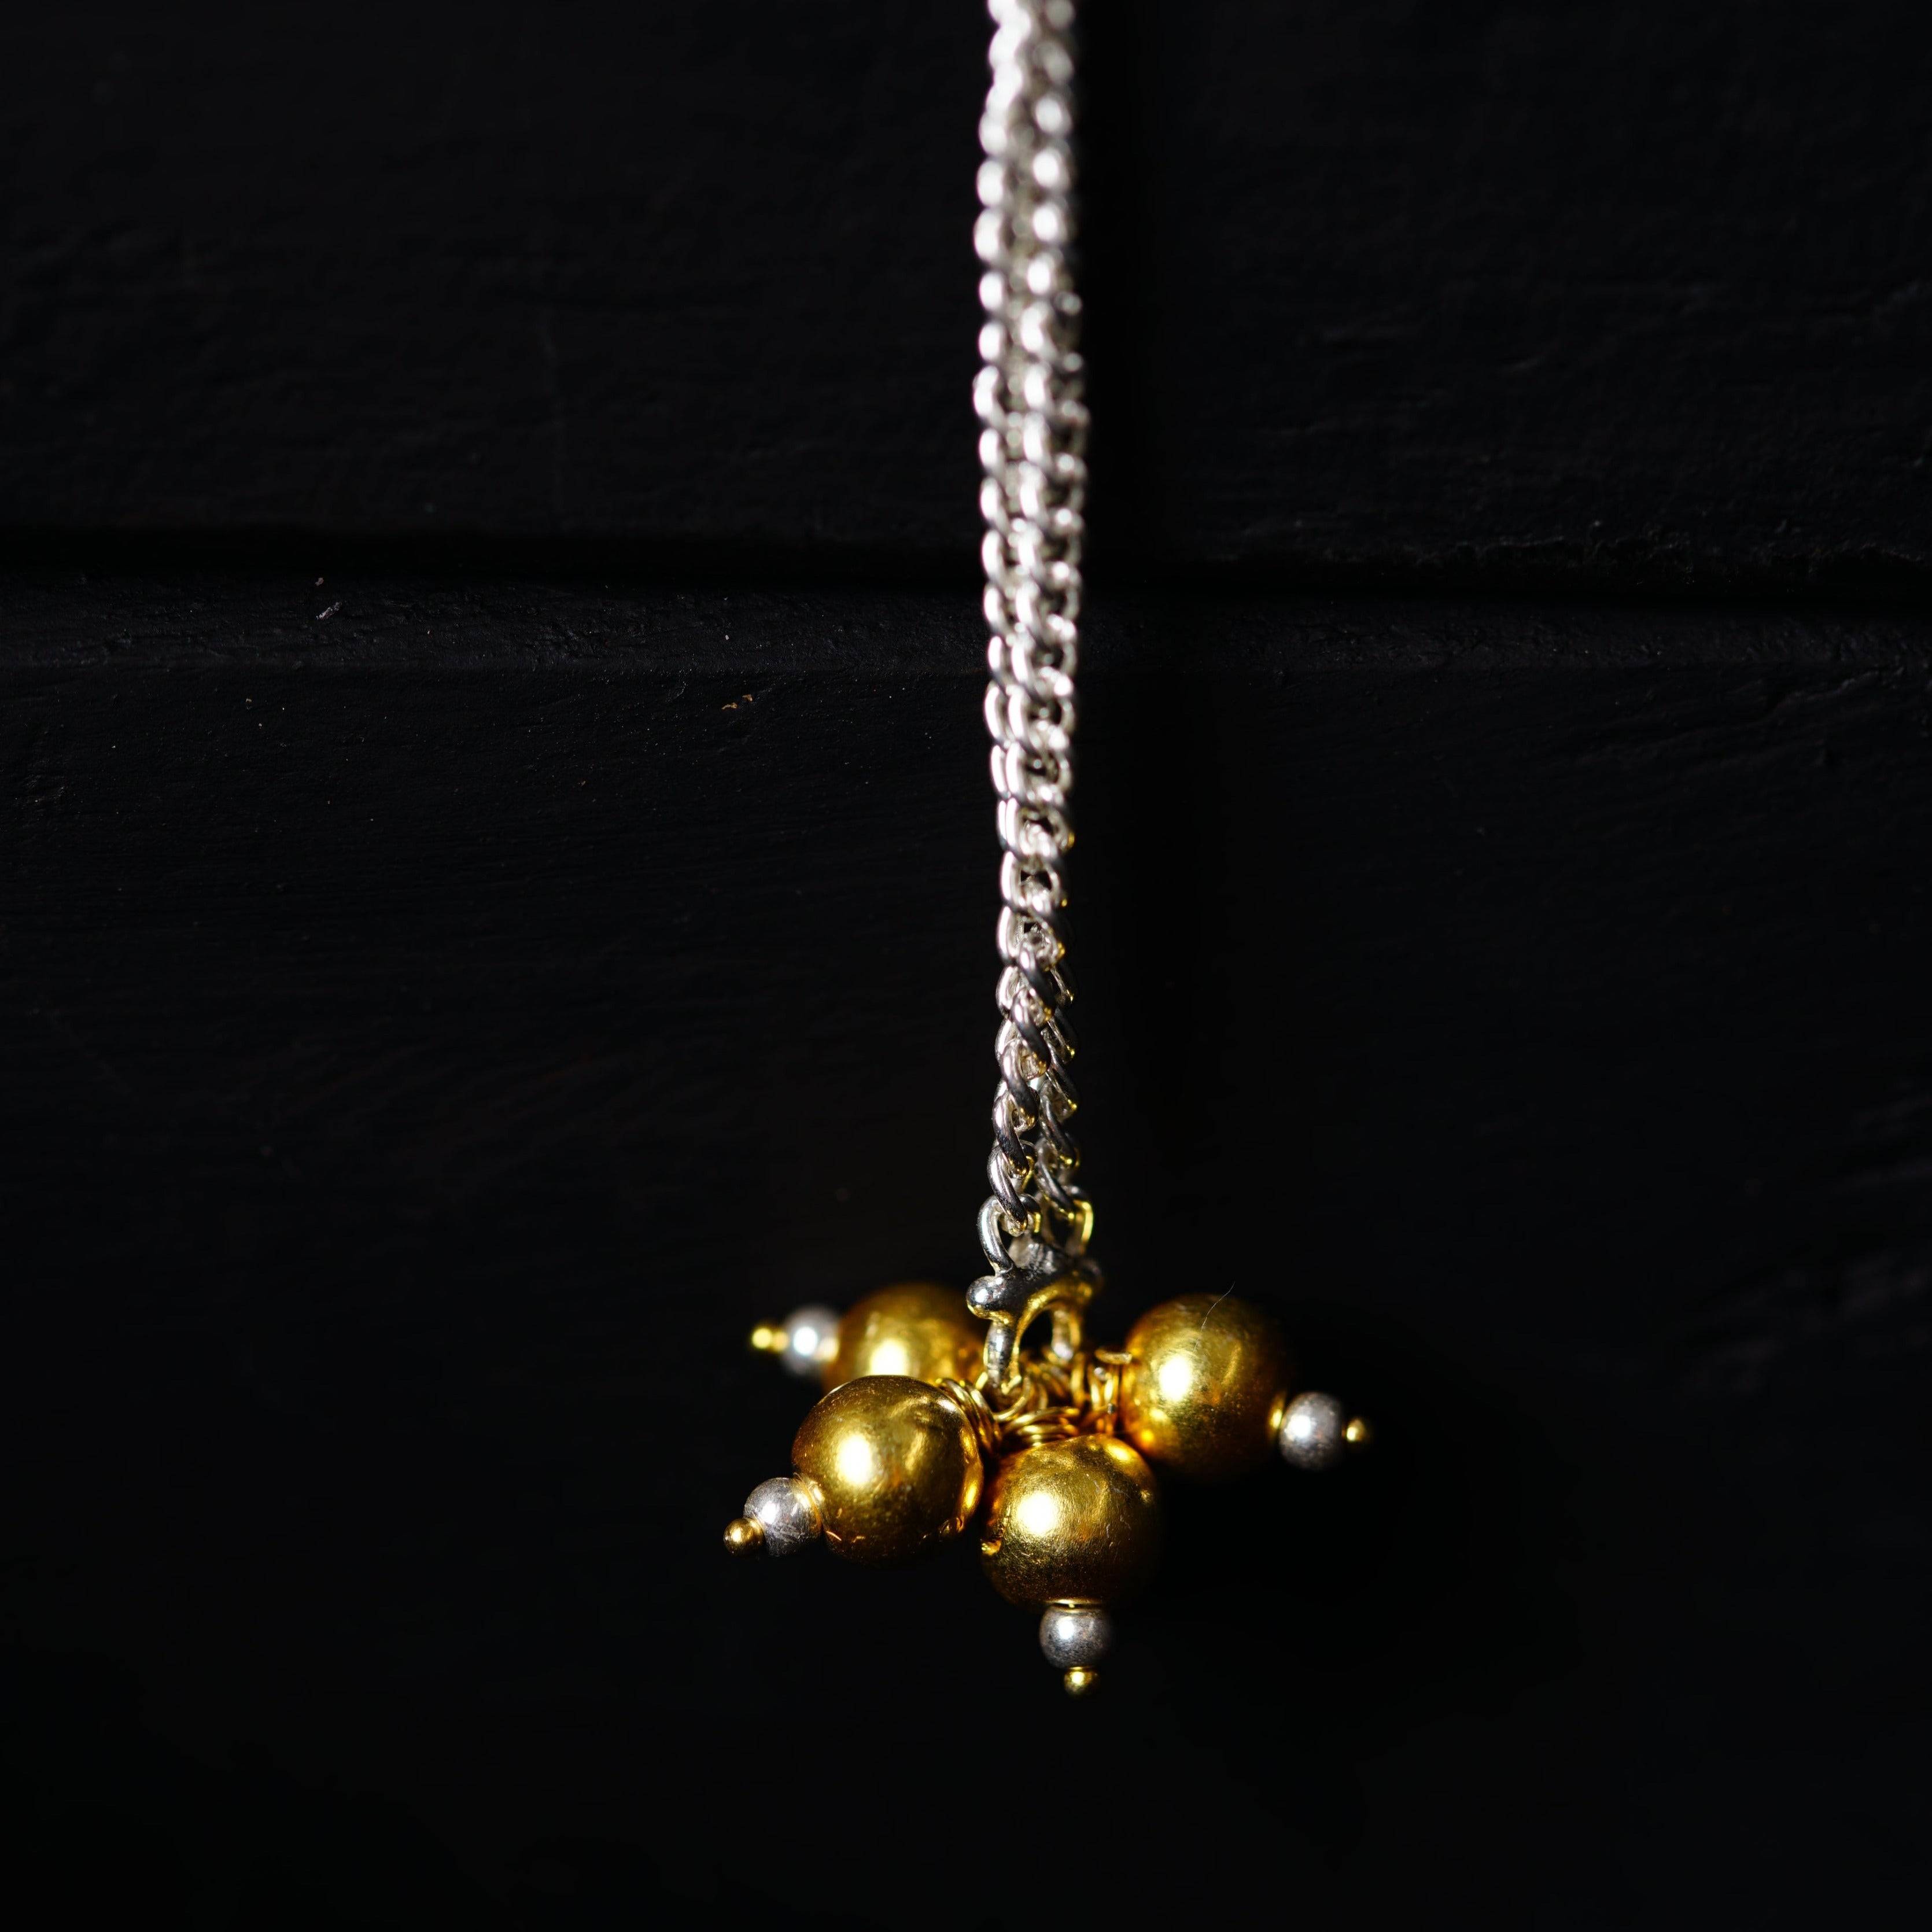 a close up of a necklace on a chain